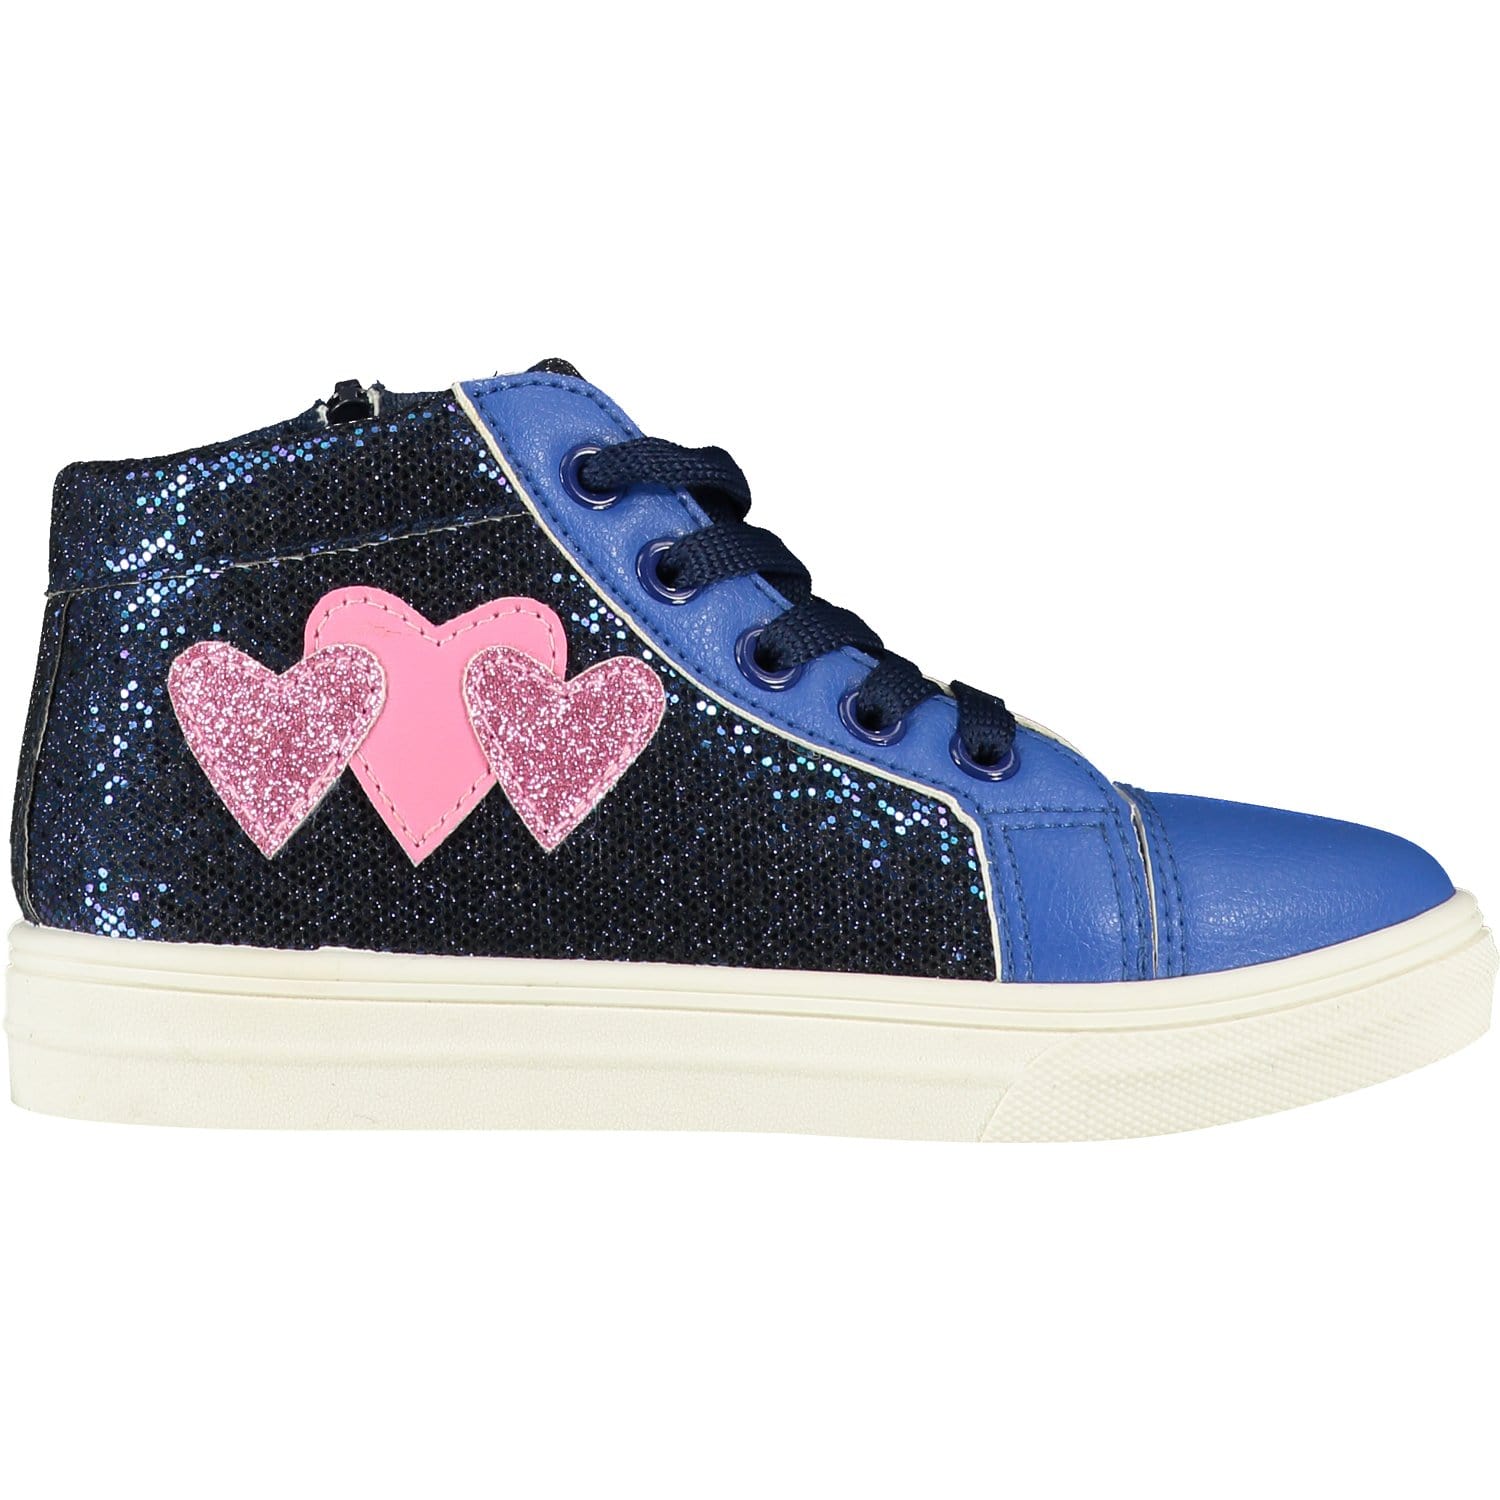 A DEE - Heart High Top Lace Trainer - Bright Blue